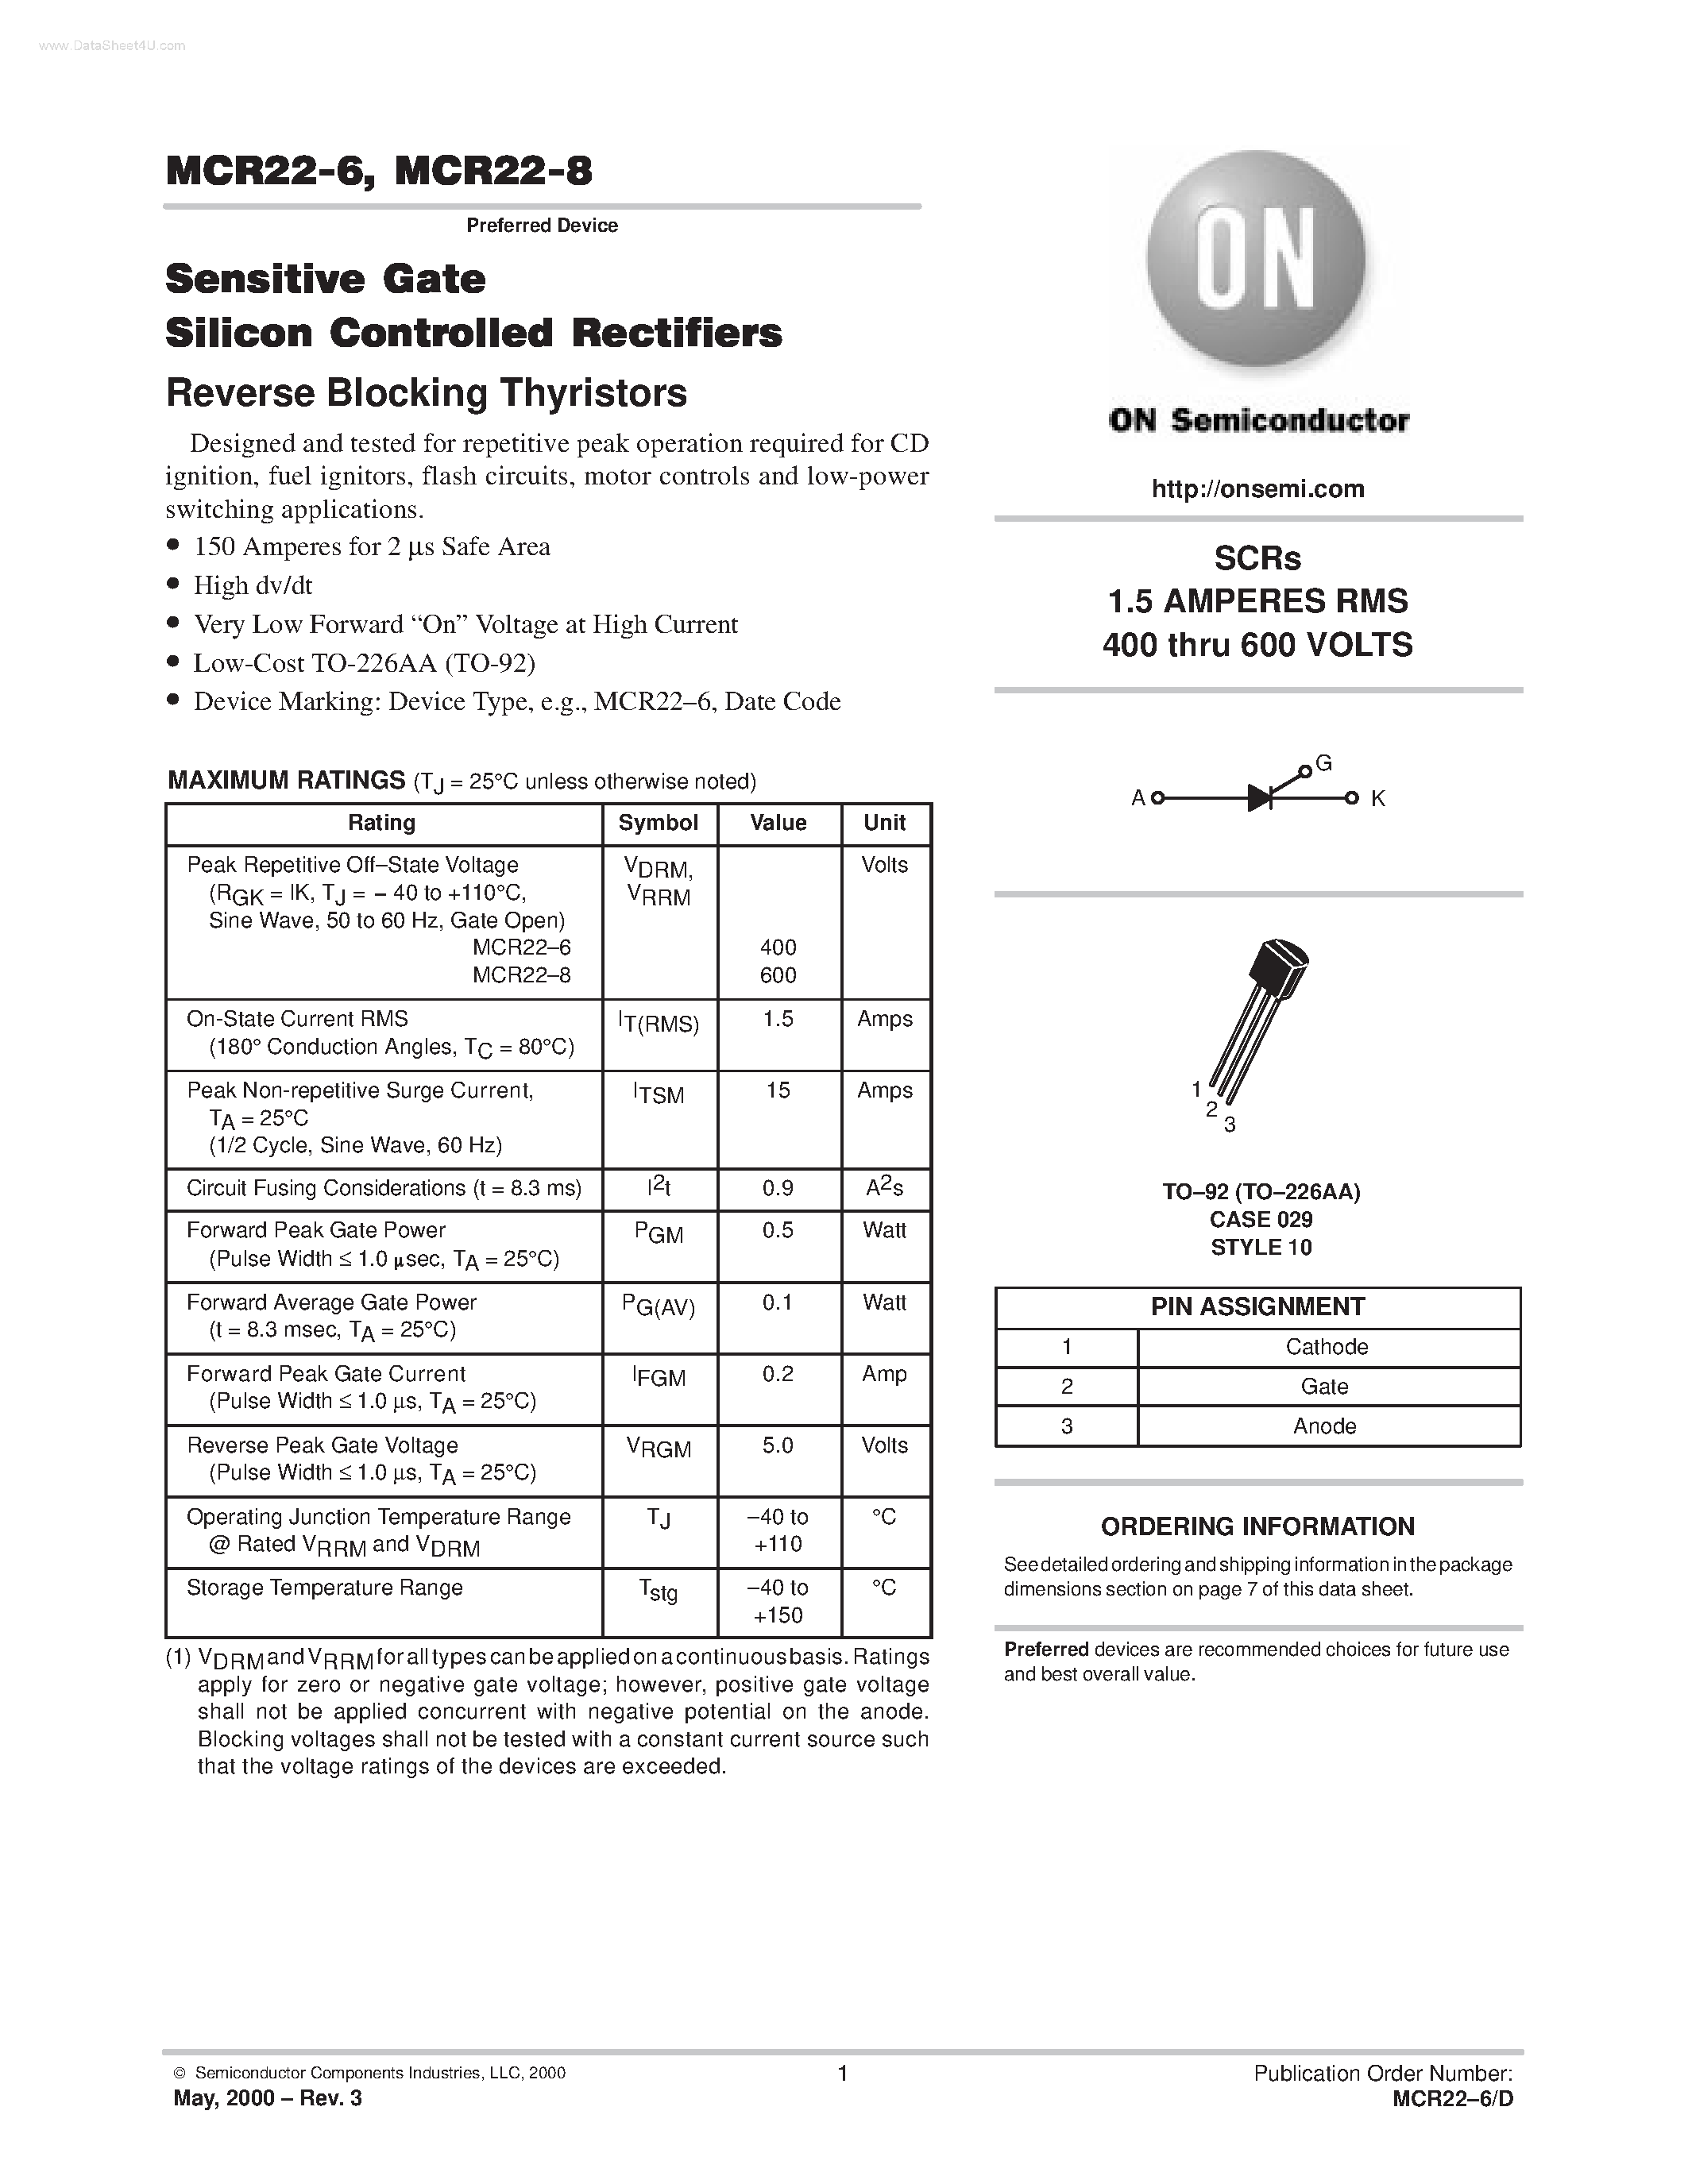 Datasheet MCR22-6 - (MCR22-6 / -8) SENSITIVE GATE SILICON CONTROLLED RECTIFIERS page 1